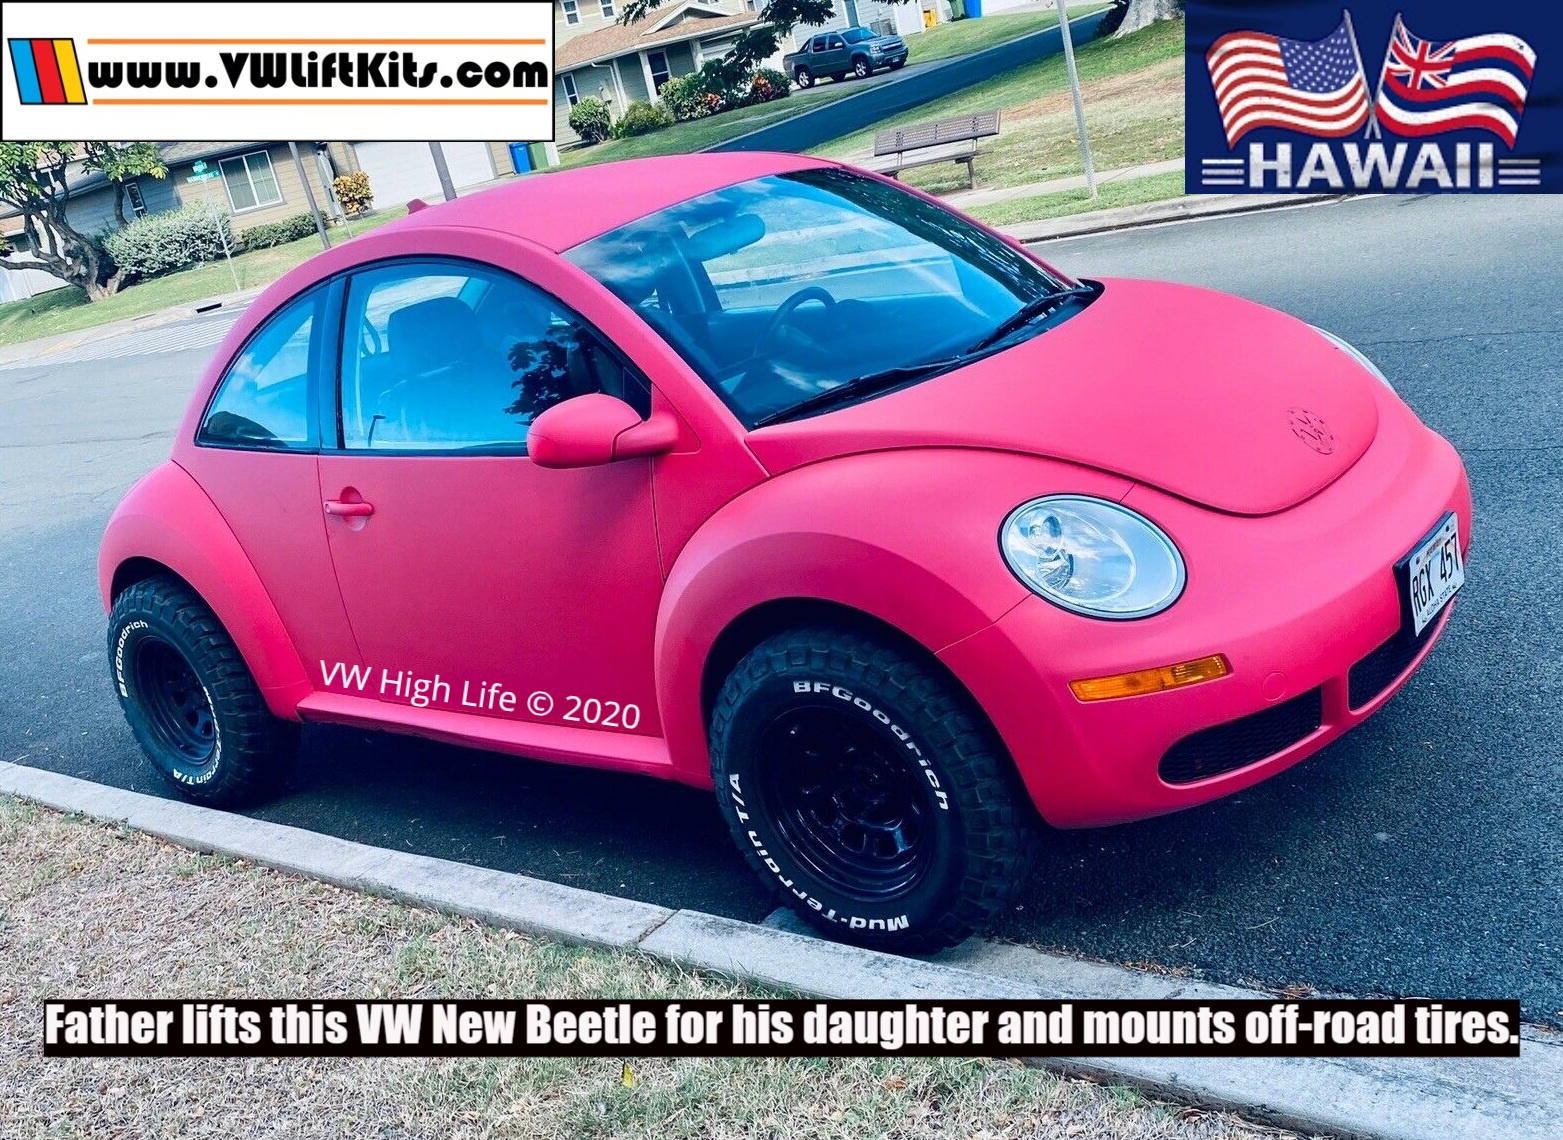 Father lifts and modifys VW New Beetle MK4 with 27-inch off-road tires in Hawaii USA for Daughter.